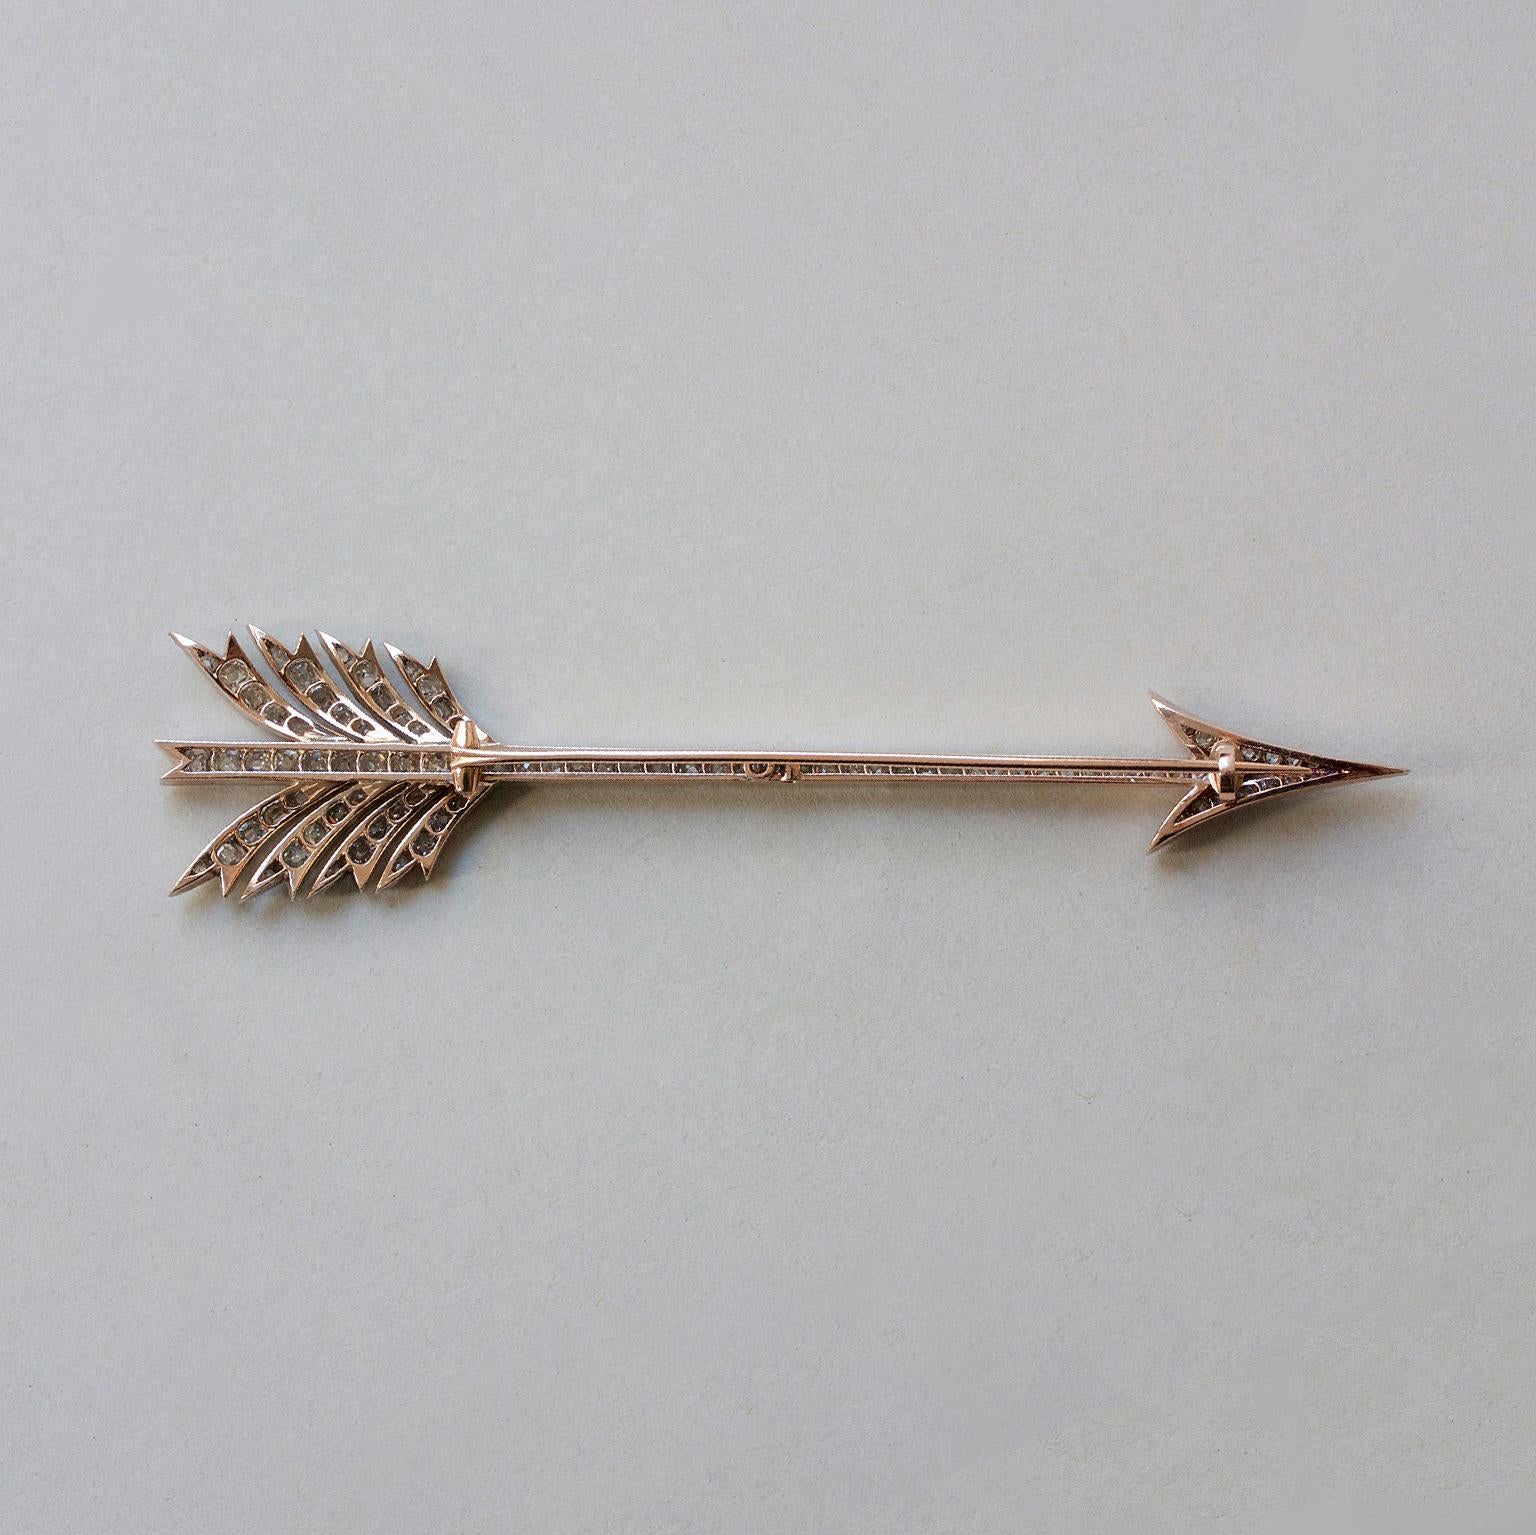 A spectactularly large 18 carat gold and silver arrow brooch set with 114 old cut diamonds (app. 5.44 carat in total), in its original case by the Linzeler Frères, 1885-1889, Paris, France.

weight: 19.15 gram
dimensions: 11.6 x 1.5 cm